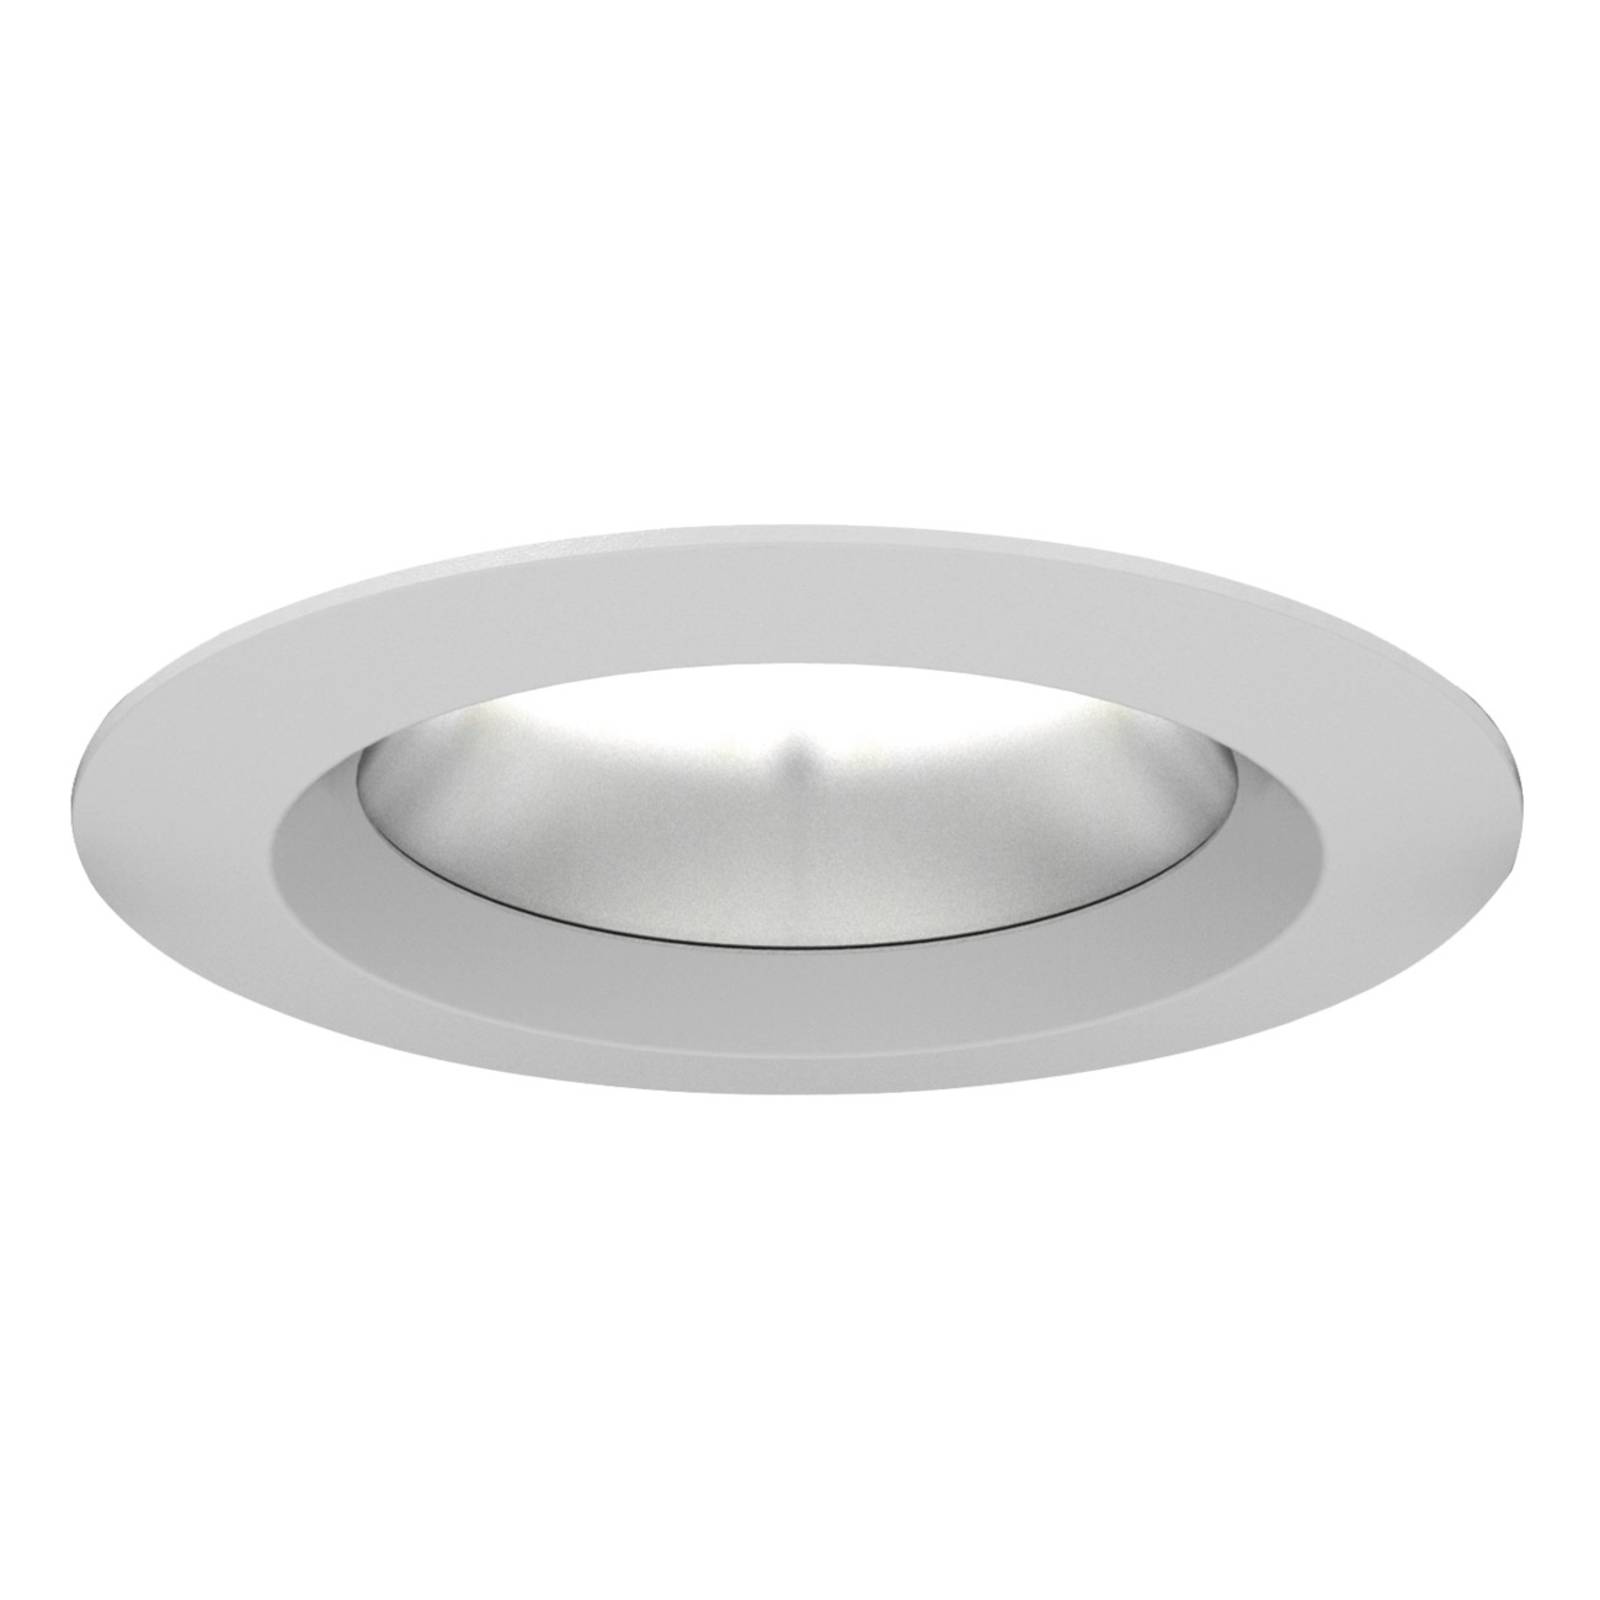 Image of Siteco Lunis 40 IP65 downlight LED dimmable Ø11cm 4058352408483